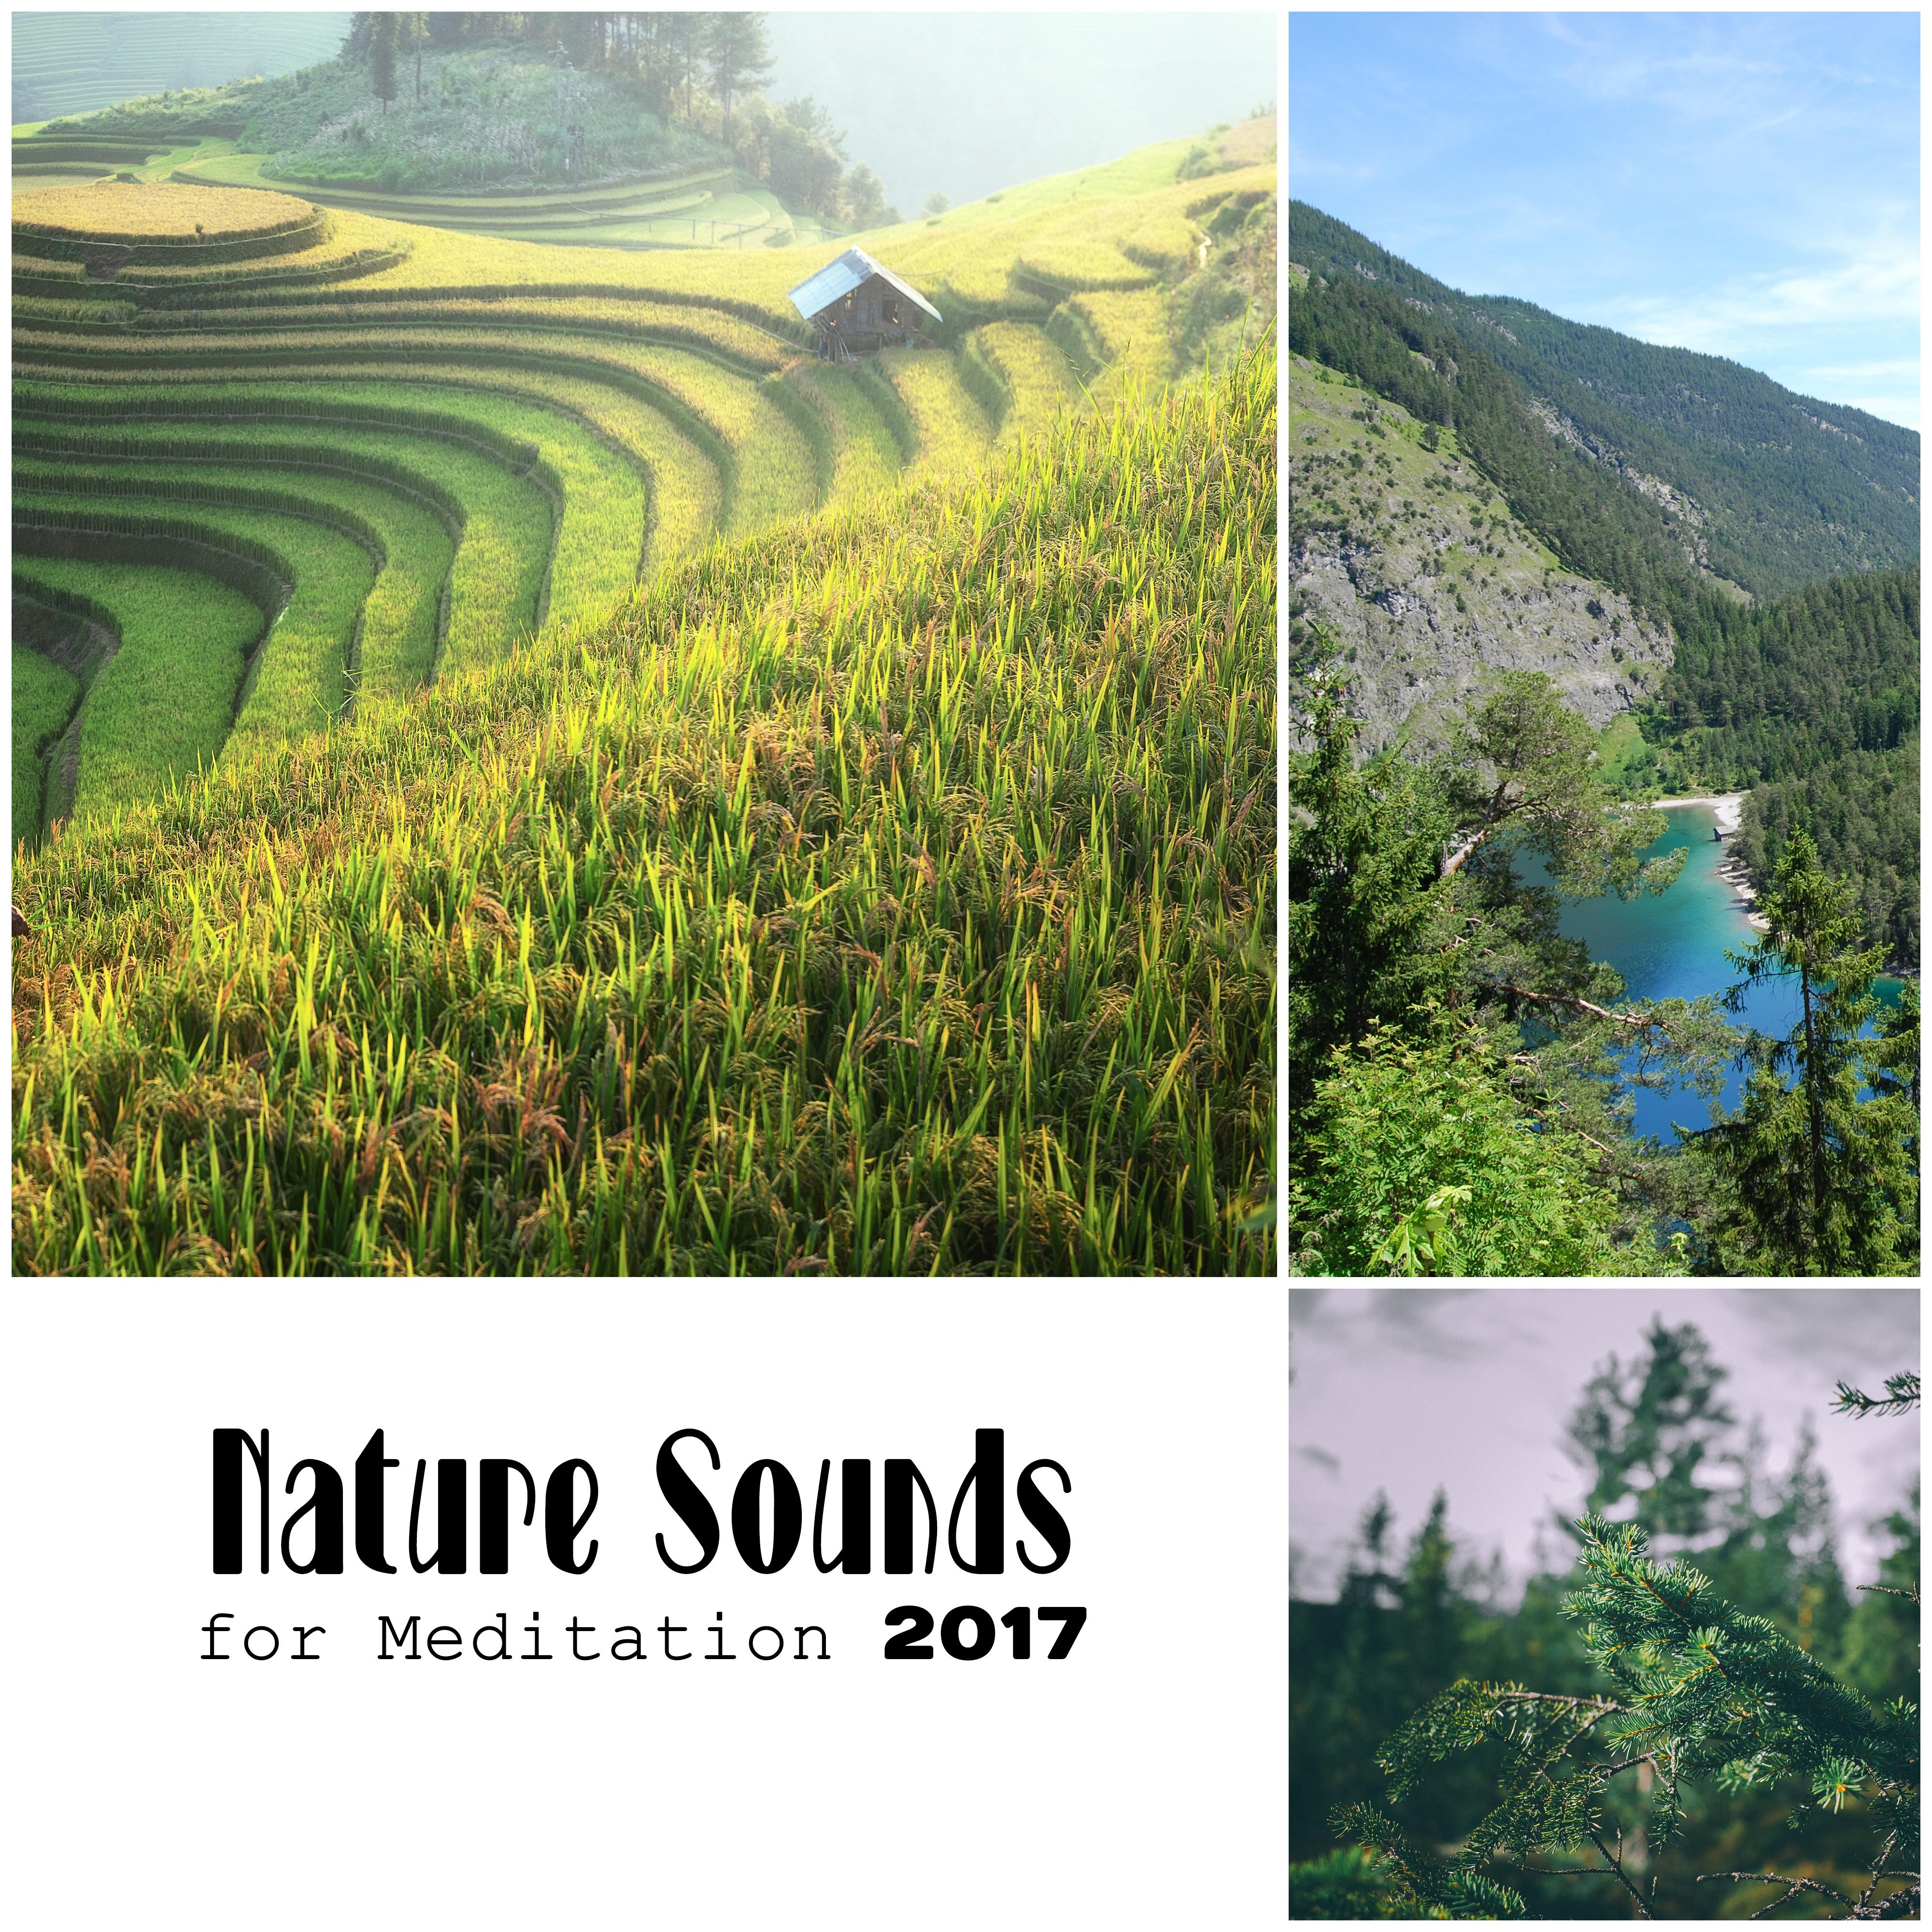 Nature Sounds for Meditation 2017 – Pure Mind, Zen Music for Relaxation, Sleep, Healing, Yoga, Stress Relief, Sounds of Birds, Gentle Rain